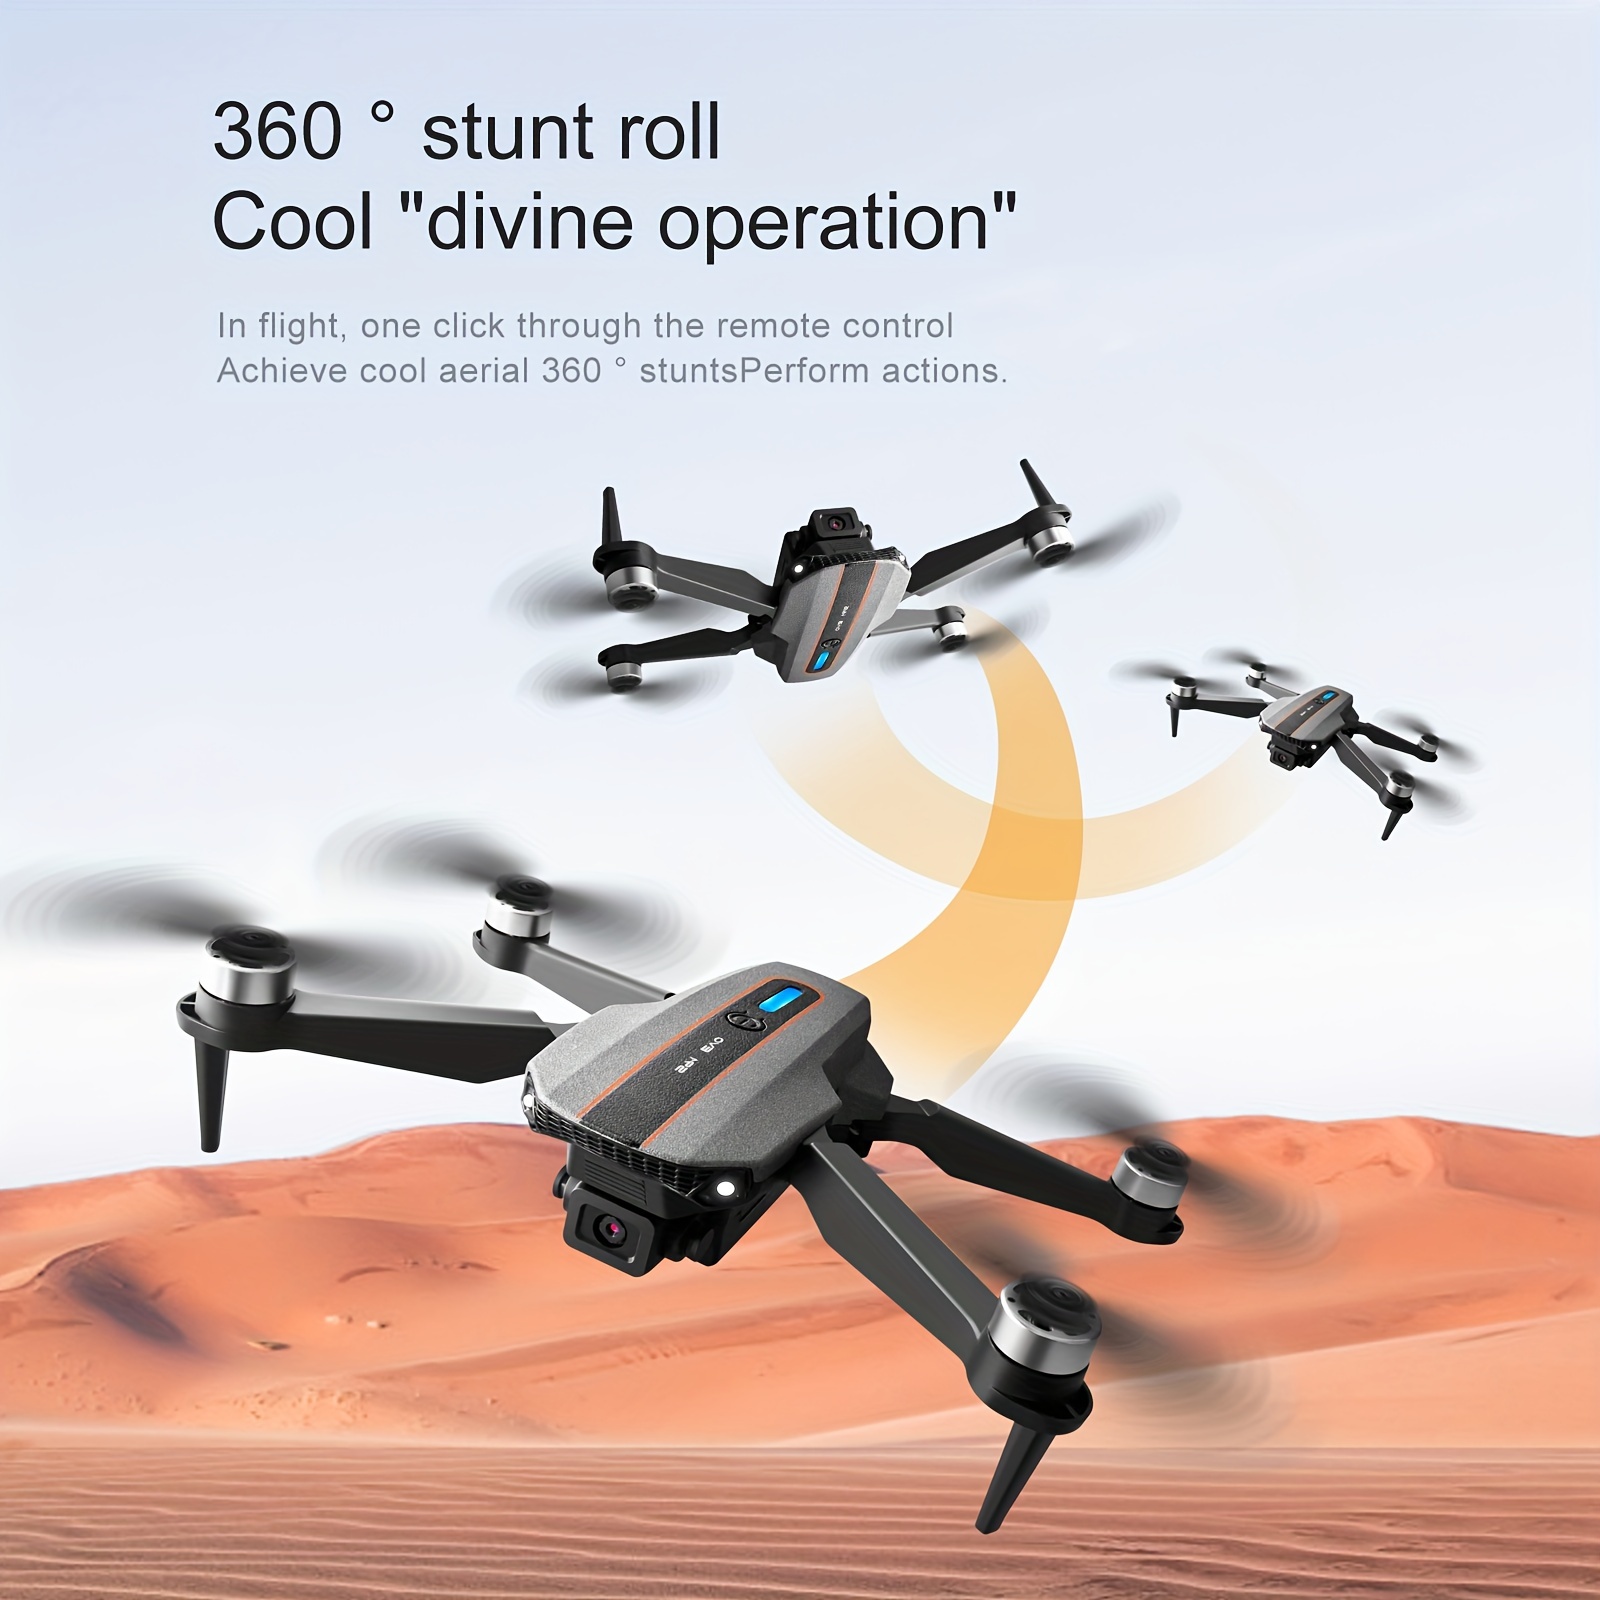 s91 remote remote control drone with hd dual camera adjustable headless mode track flying one key surround smart follow brushless motor drone self with optical flow positioning function details 12